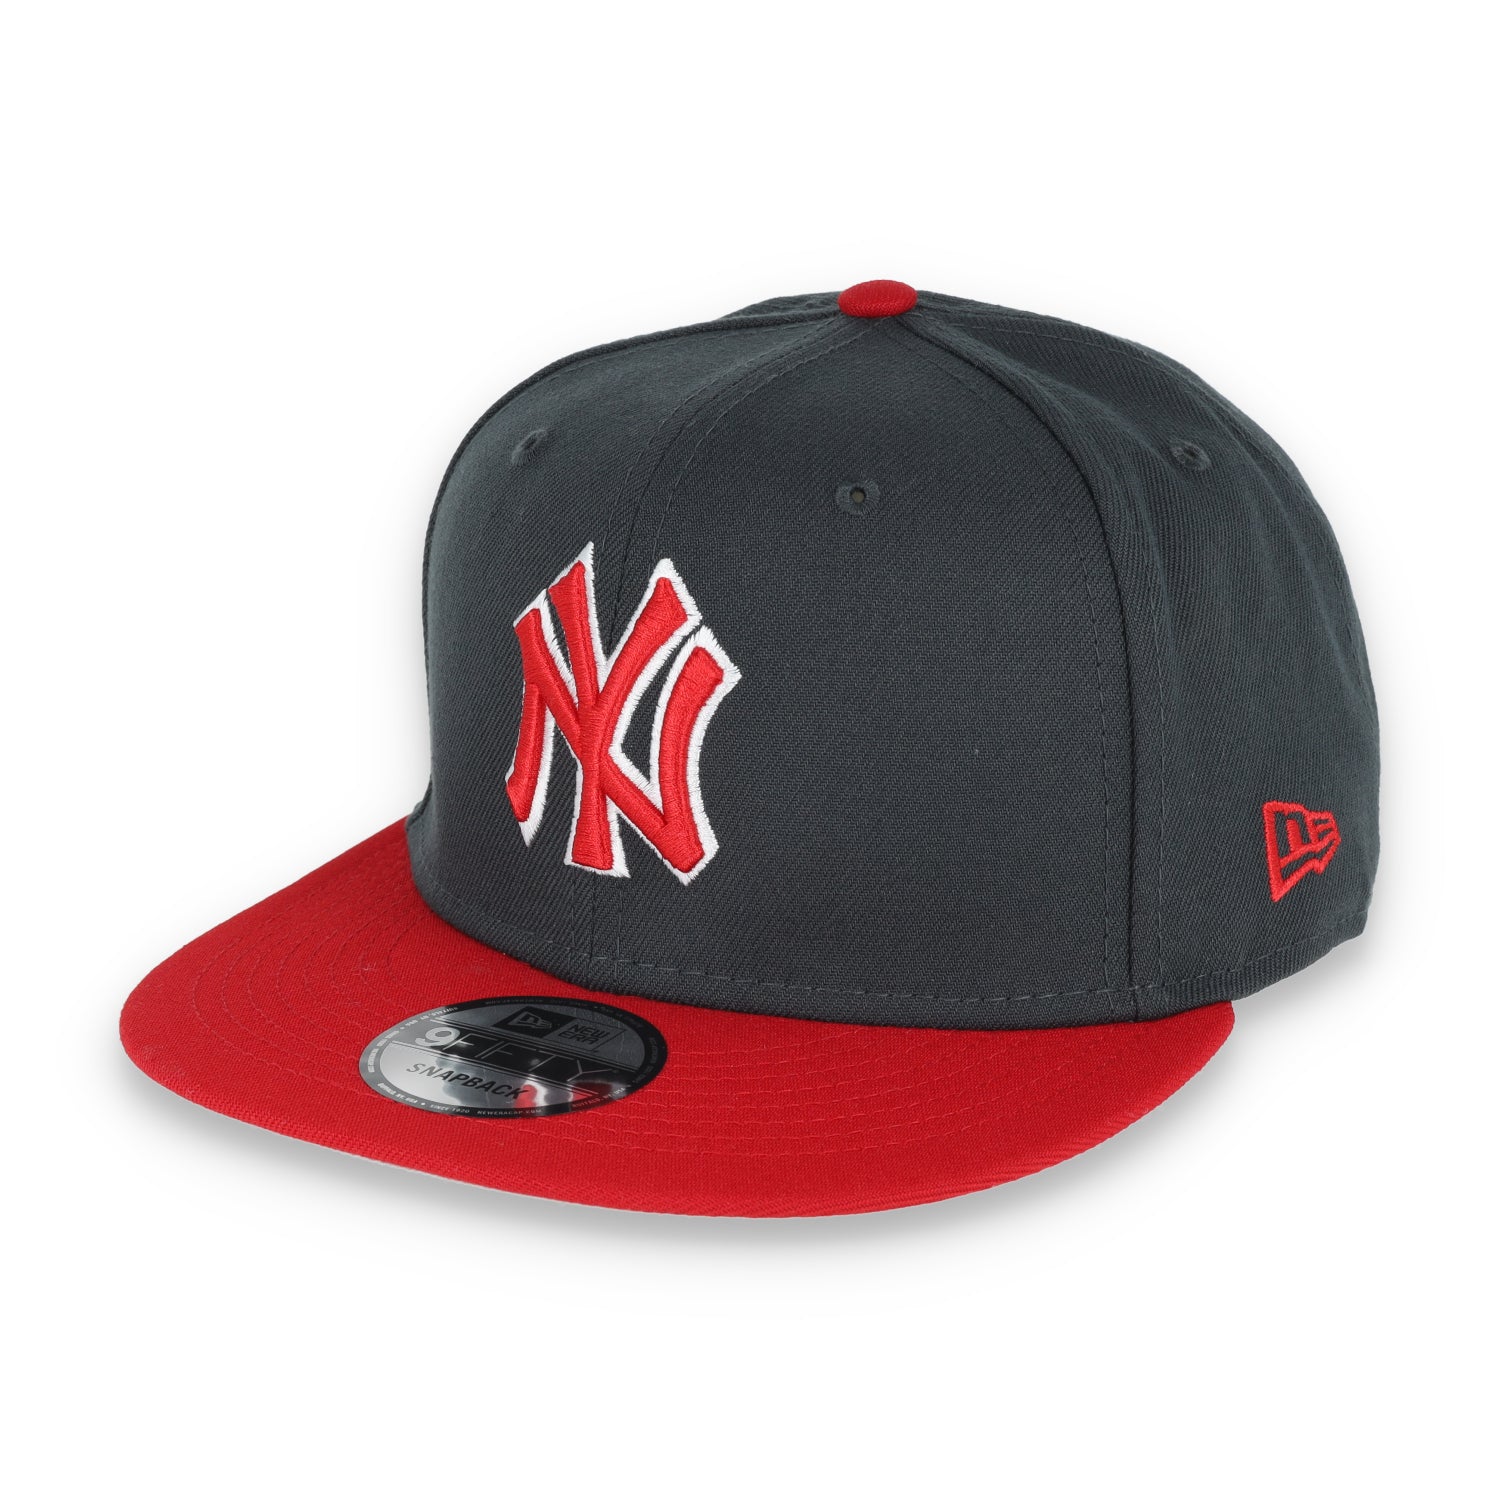 New York Yankees 2-Tone Color Pack 9FIFTY Snapback Hat- Grey/Scarlet